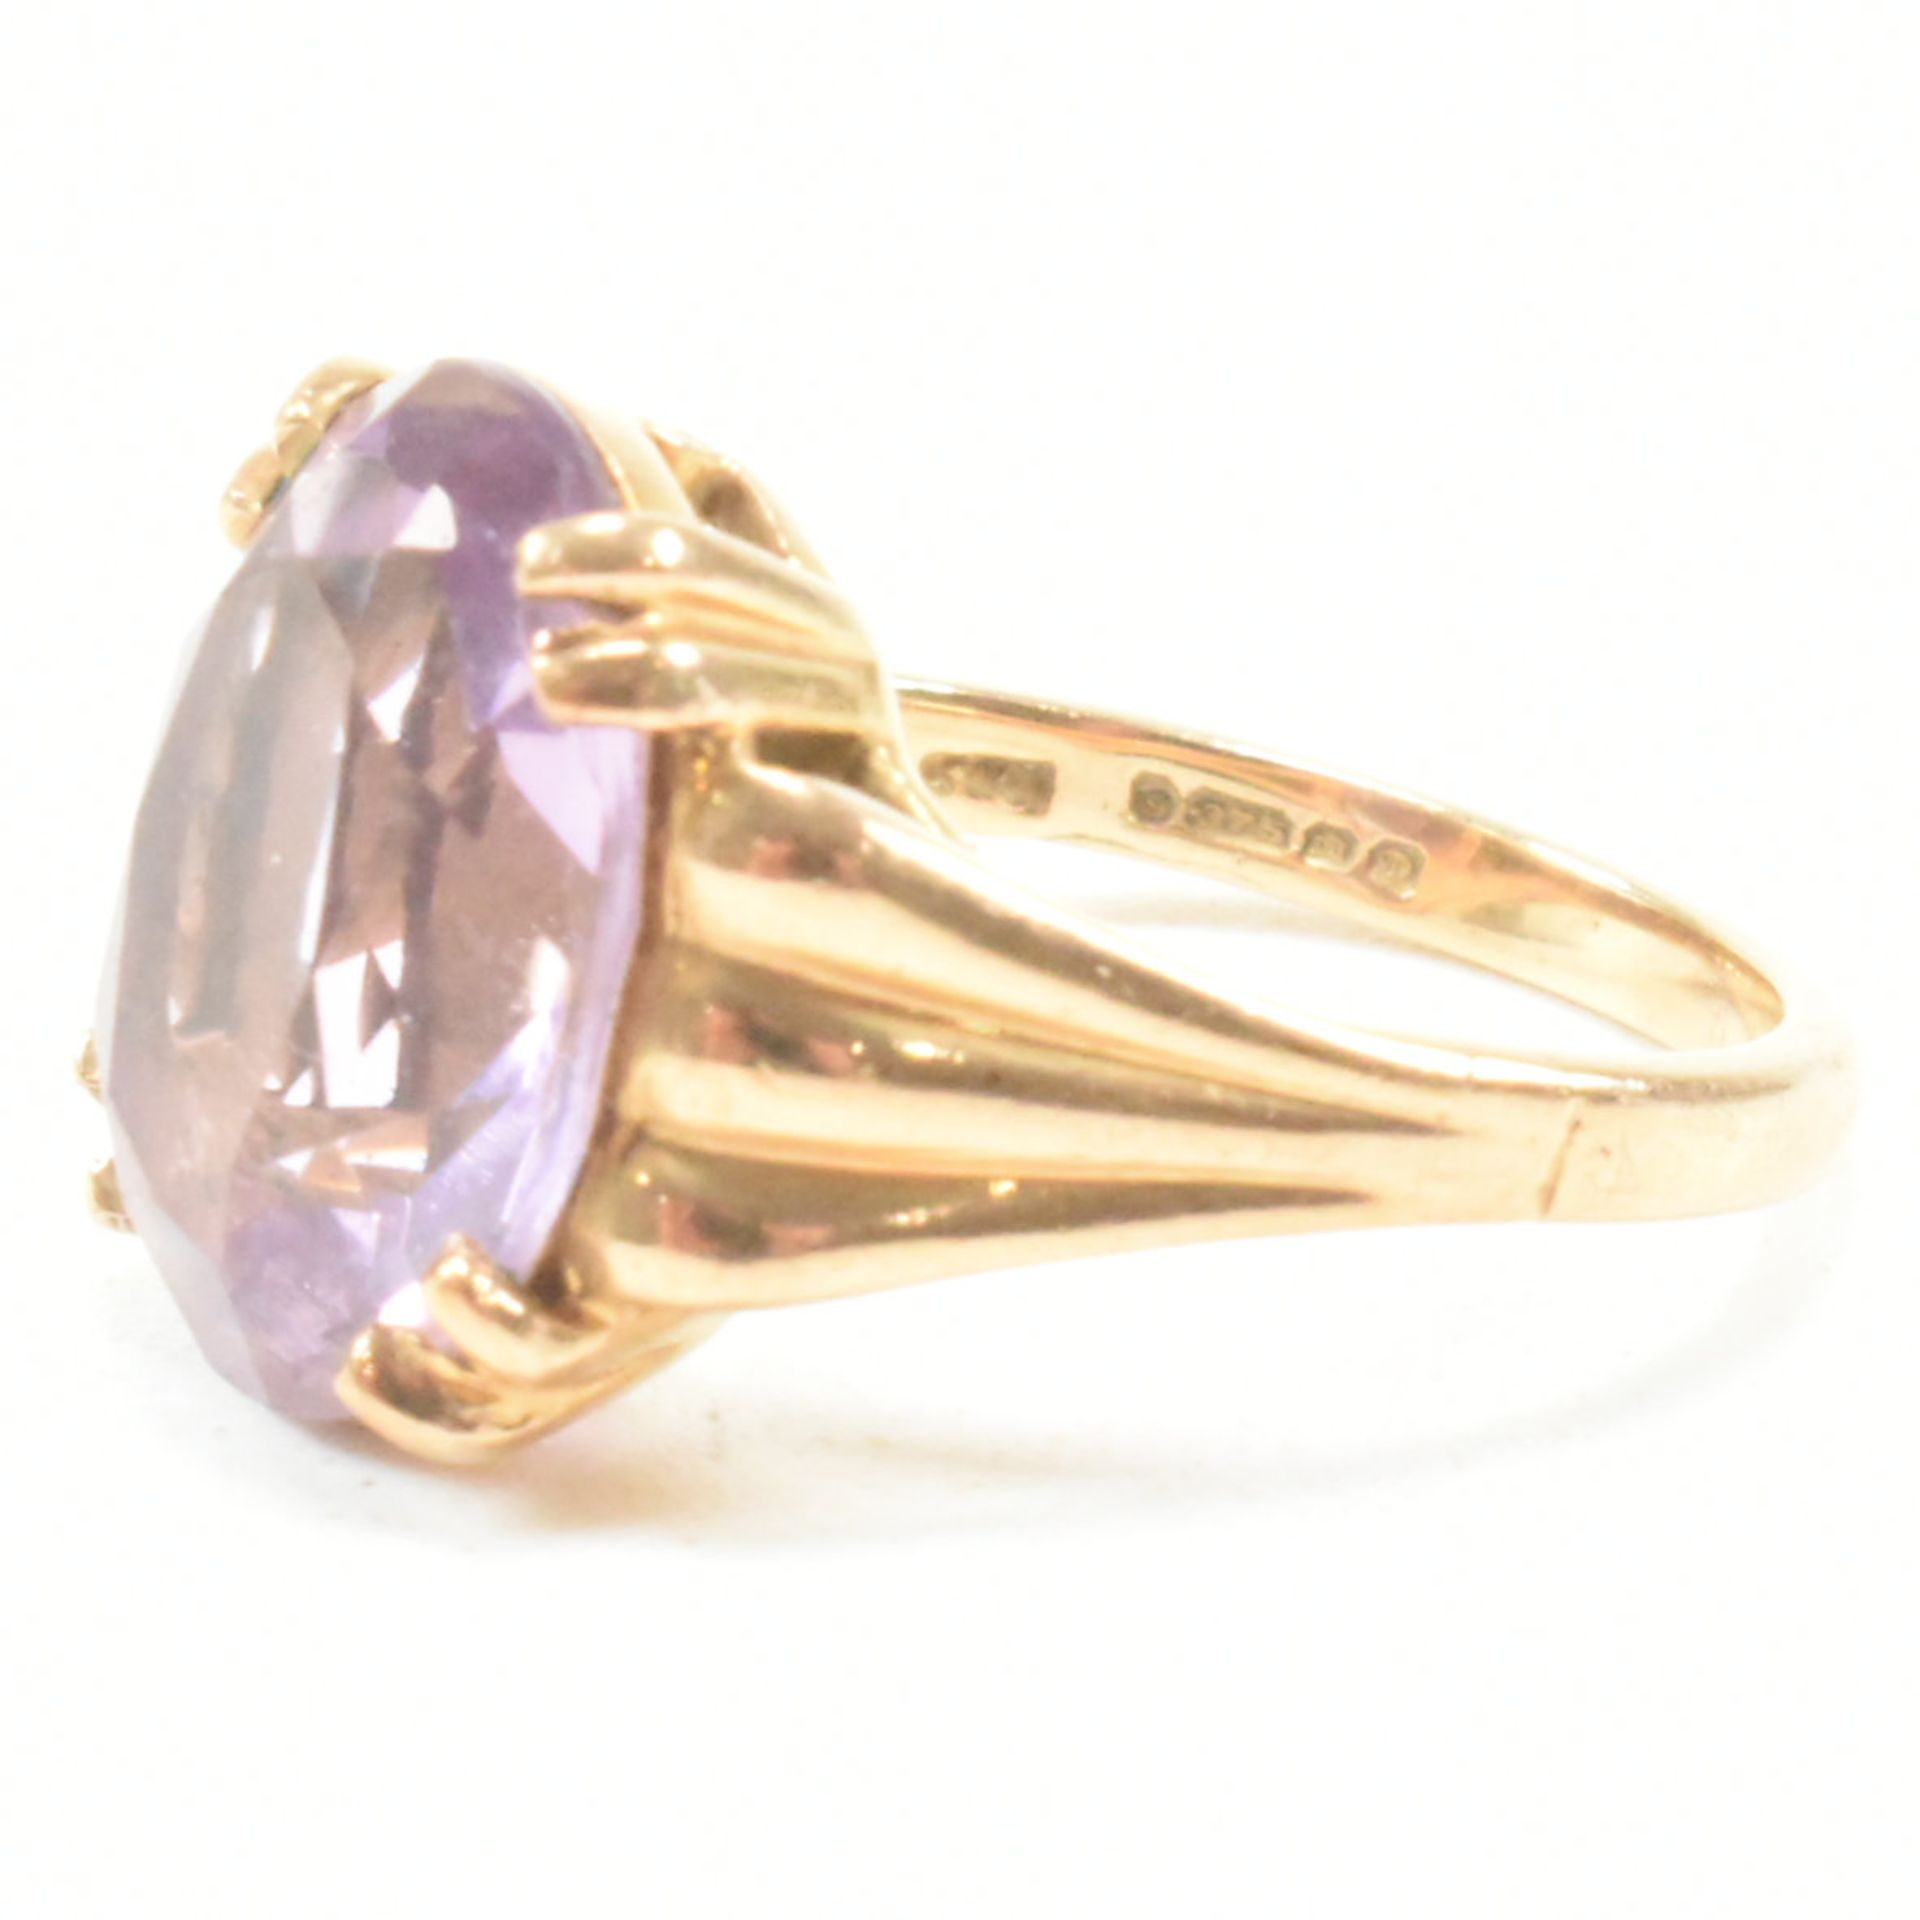 VINTAGE HALLMARKED 9CT GOLD & AMETHYST SOLITAIRE RING - Image 5 of 9